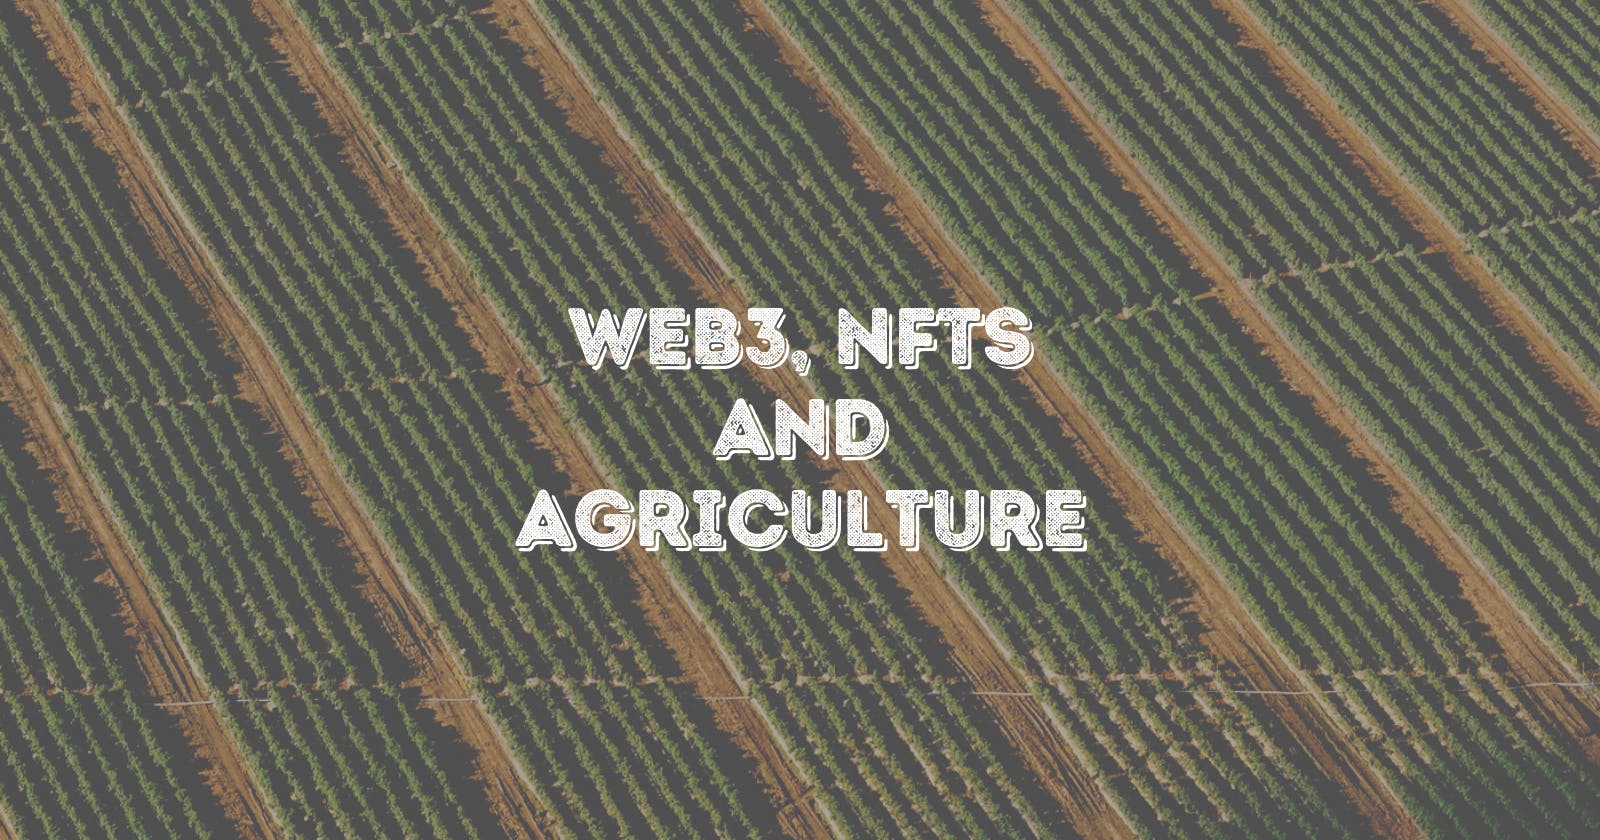 Web3, NFTs and Sustainable Agriculture